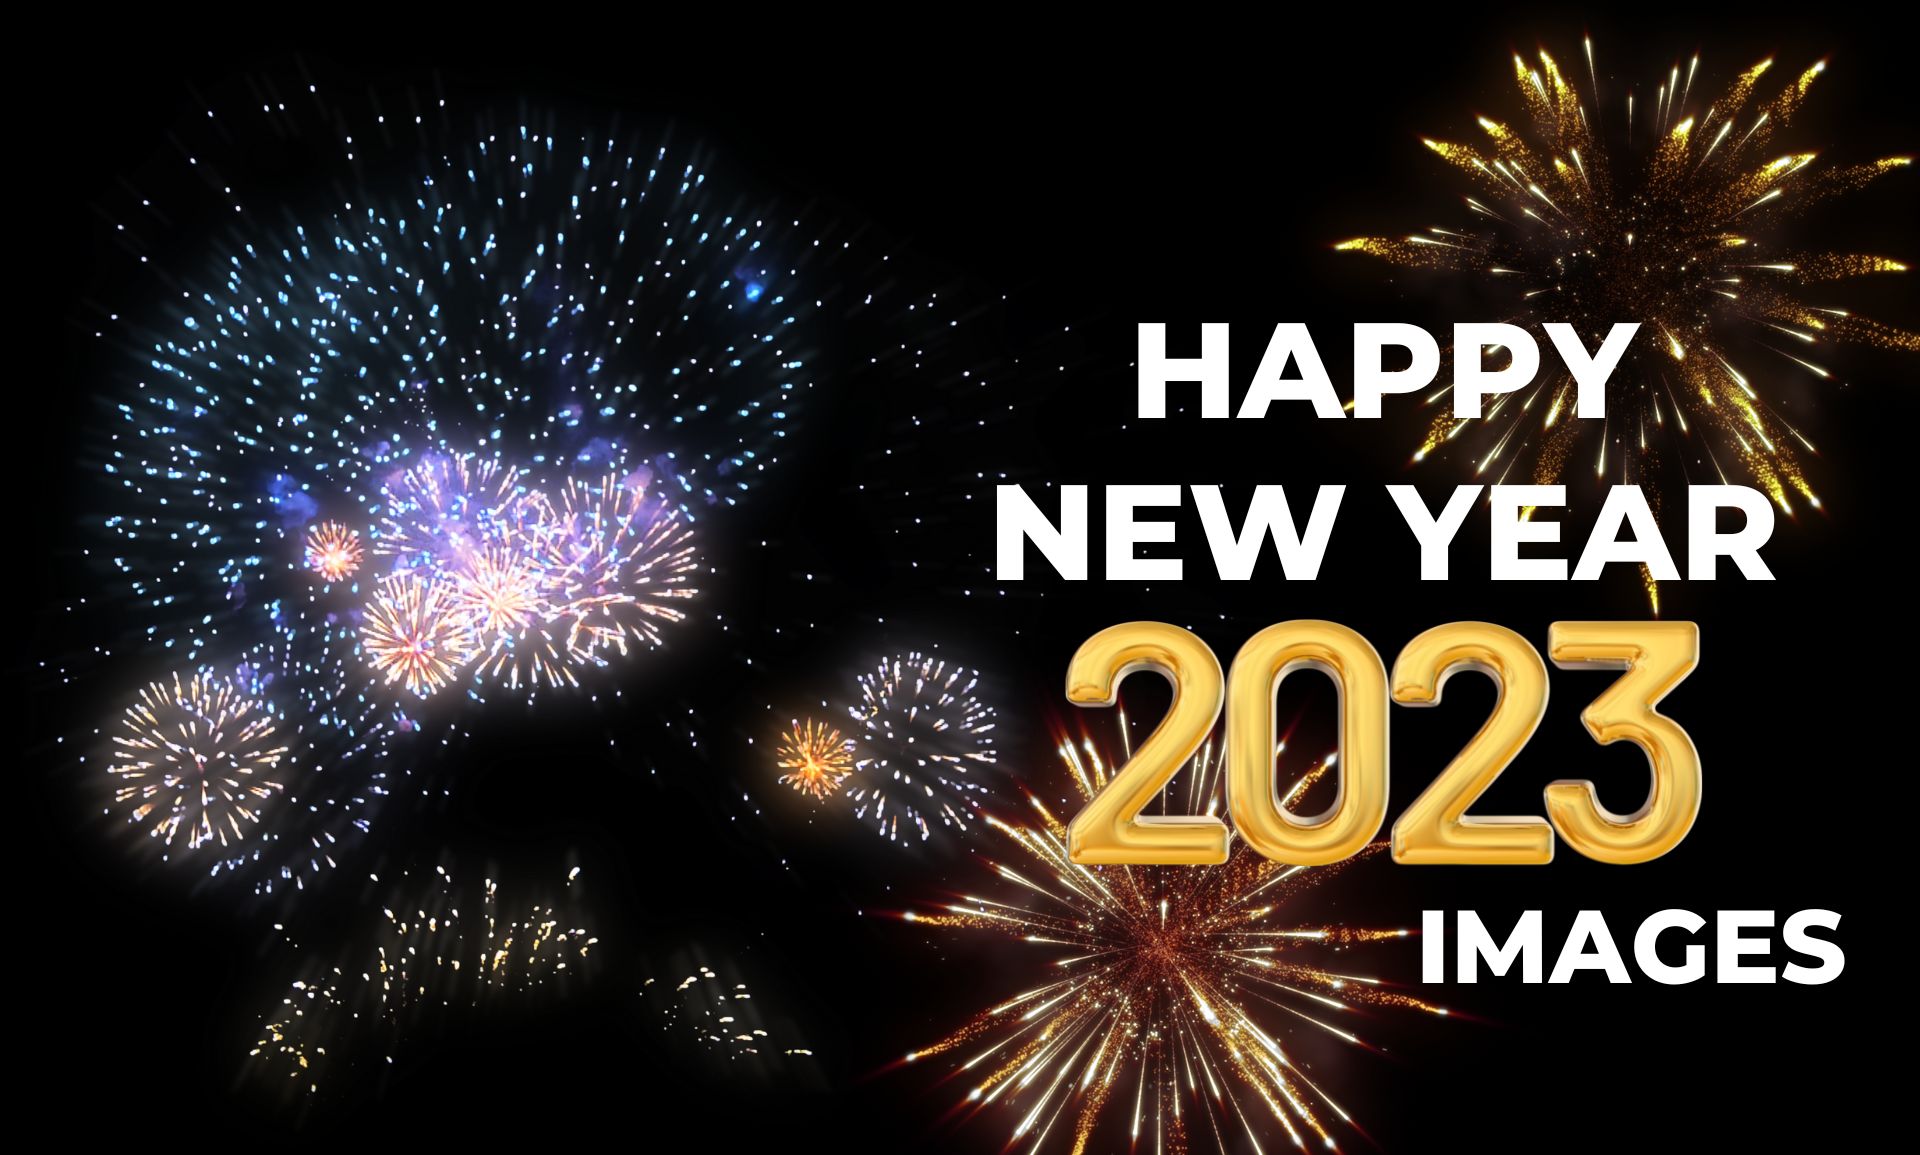 2023 Happy New Year Images